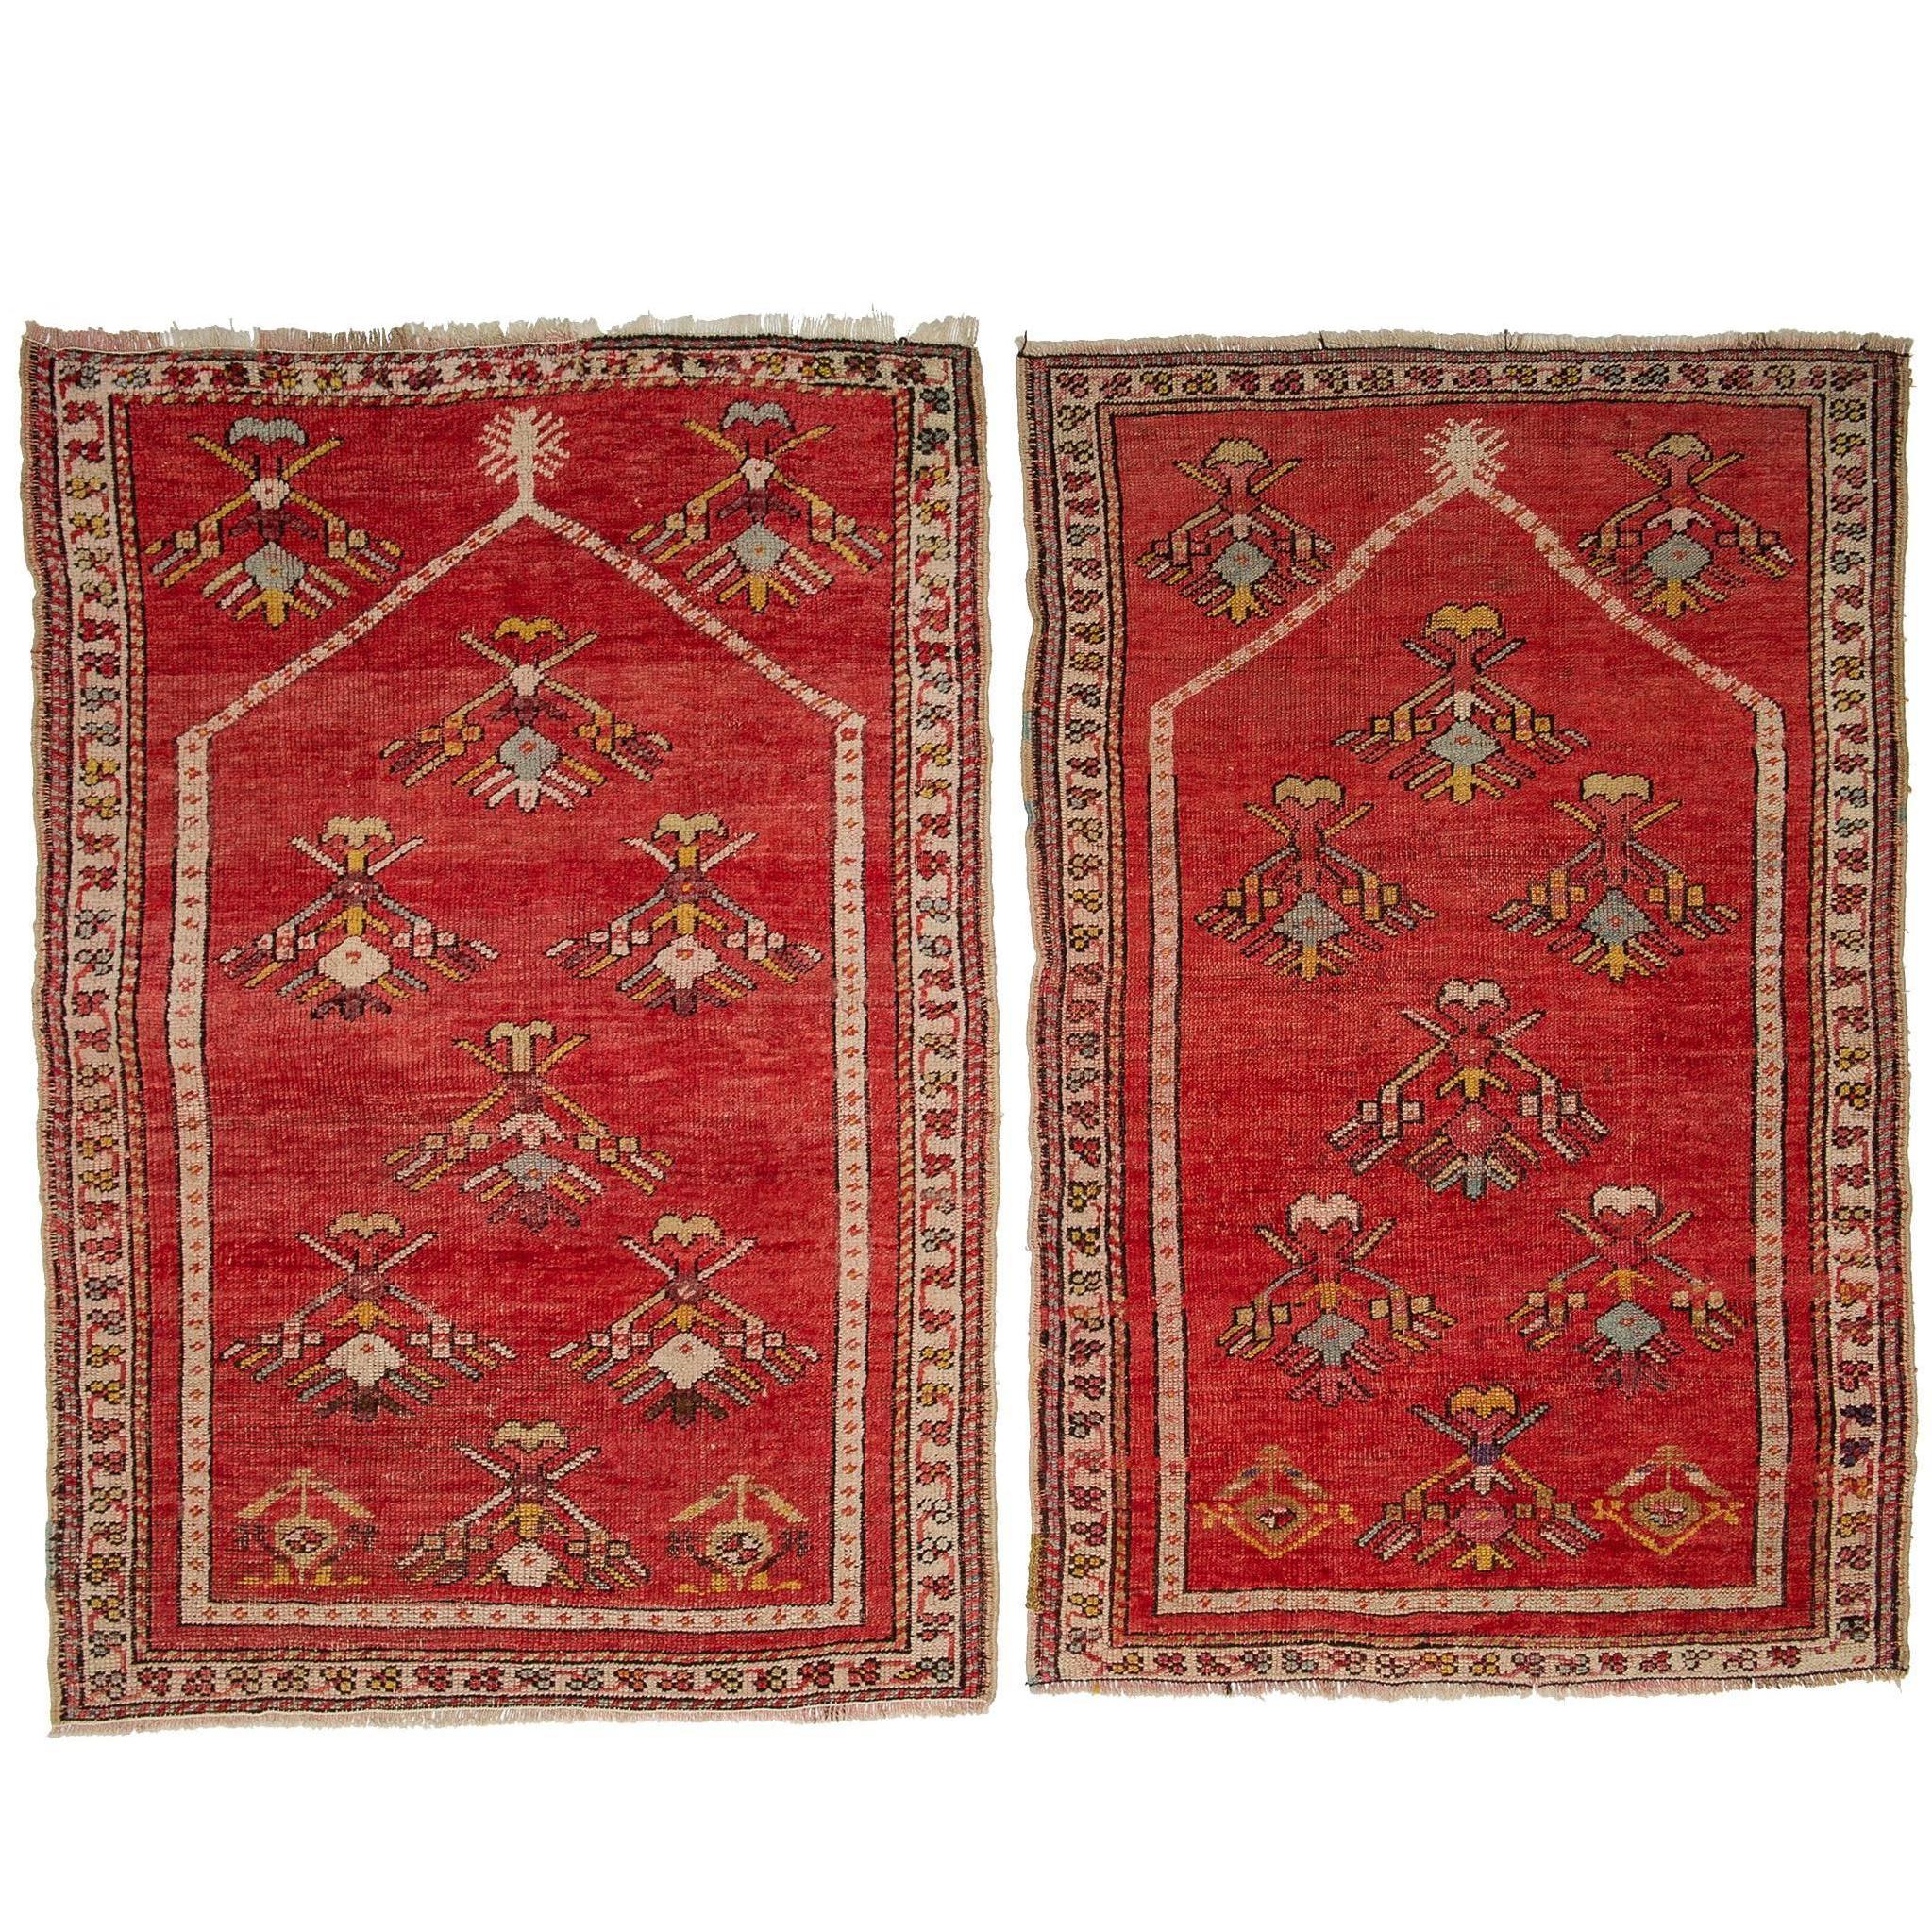  Pair of Antique KIRSHEIR Prayer Bed Side Carpets For Sale